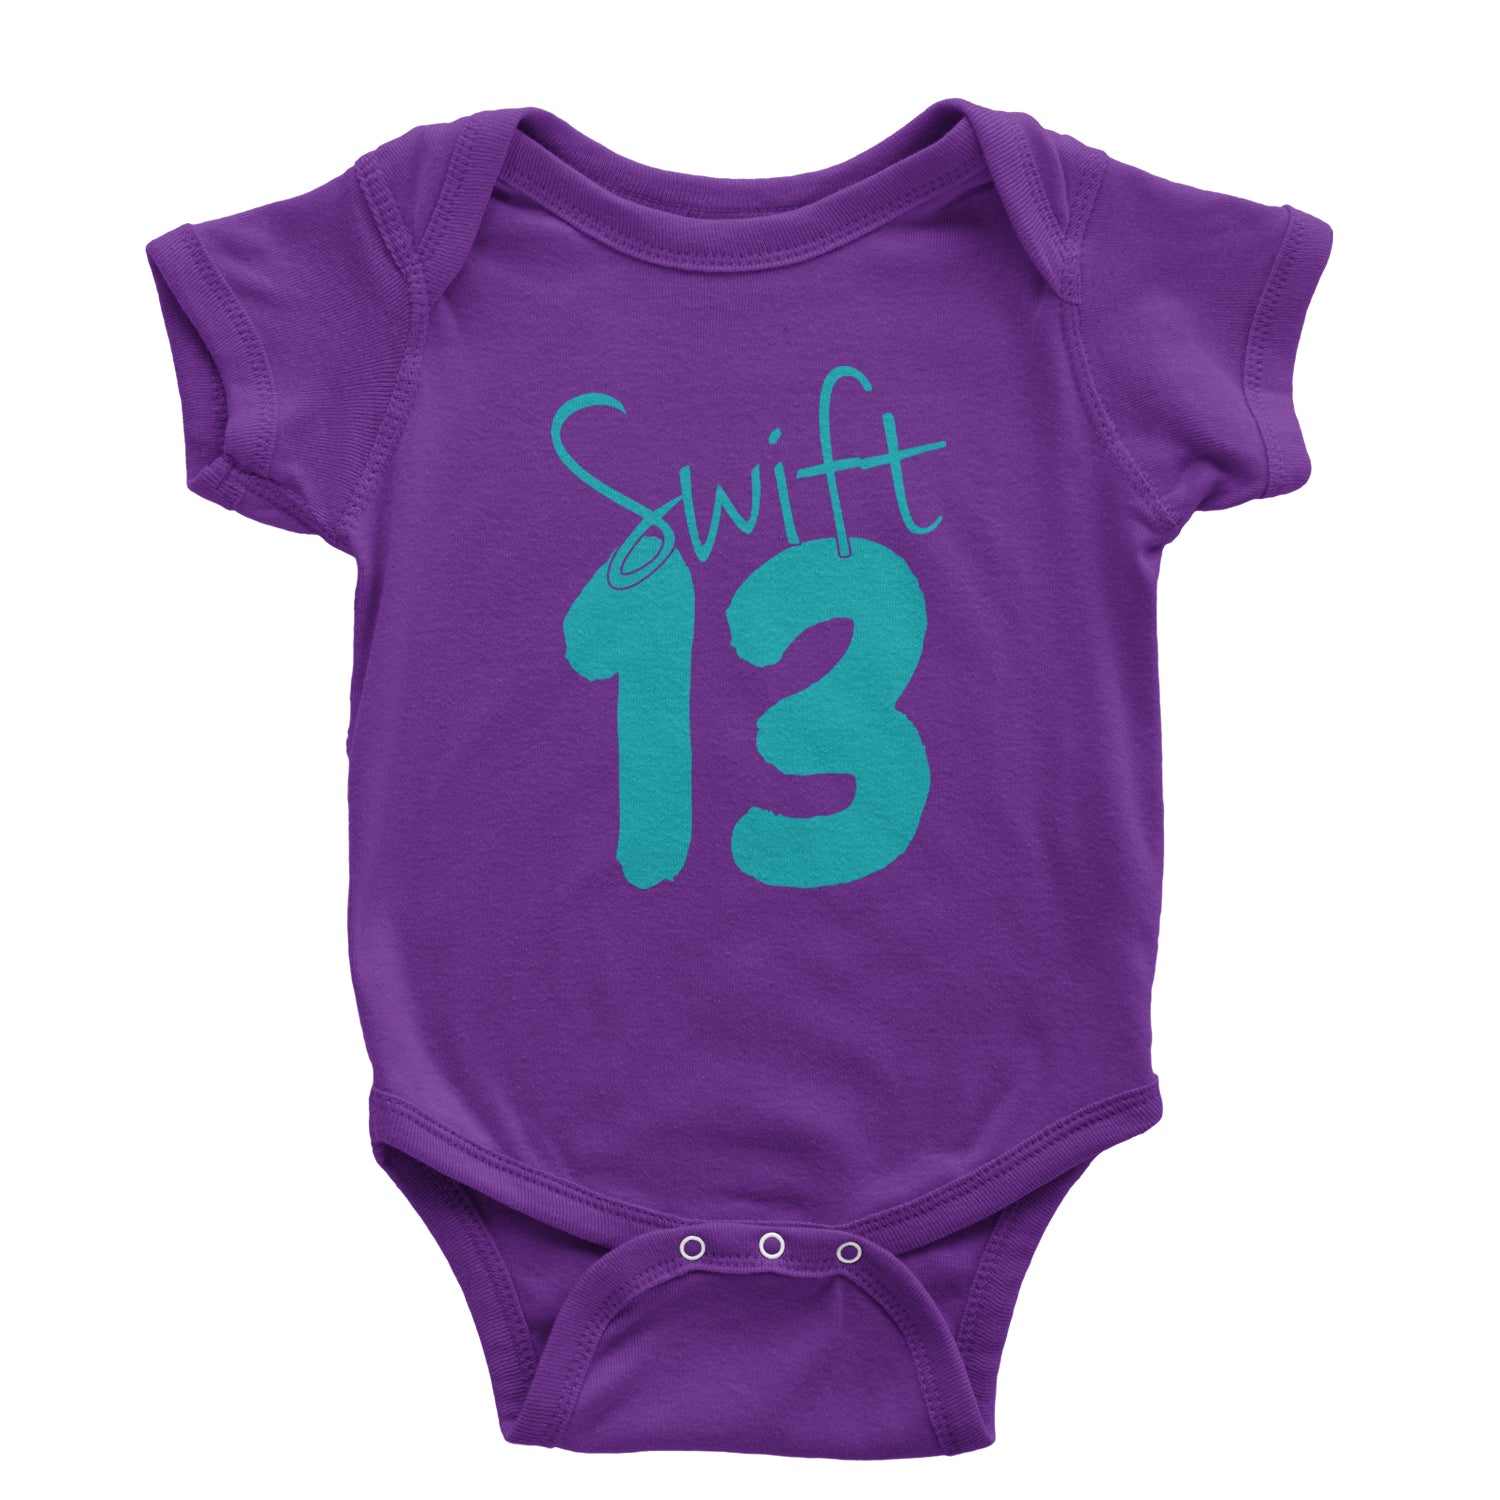 13 Swift 13 Lucky Number Era Infant One-Piece Romper Bodysuit and Toddler T-shirt